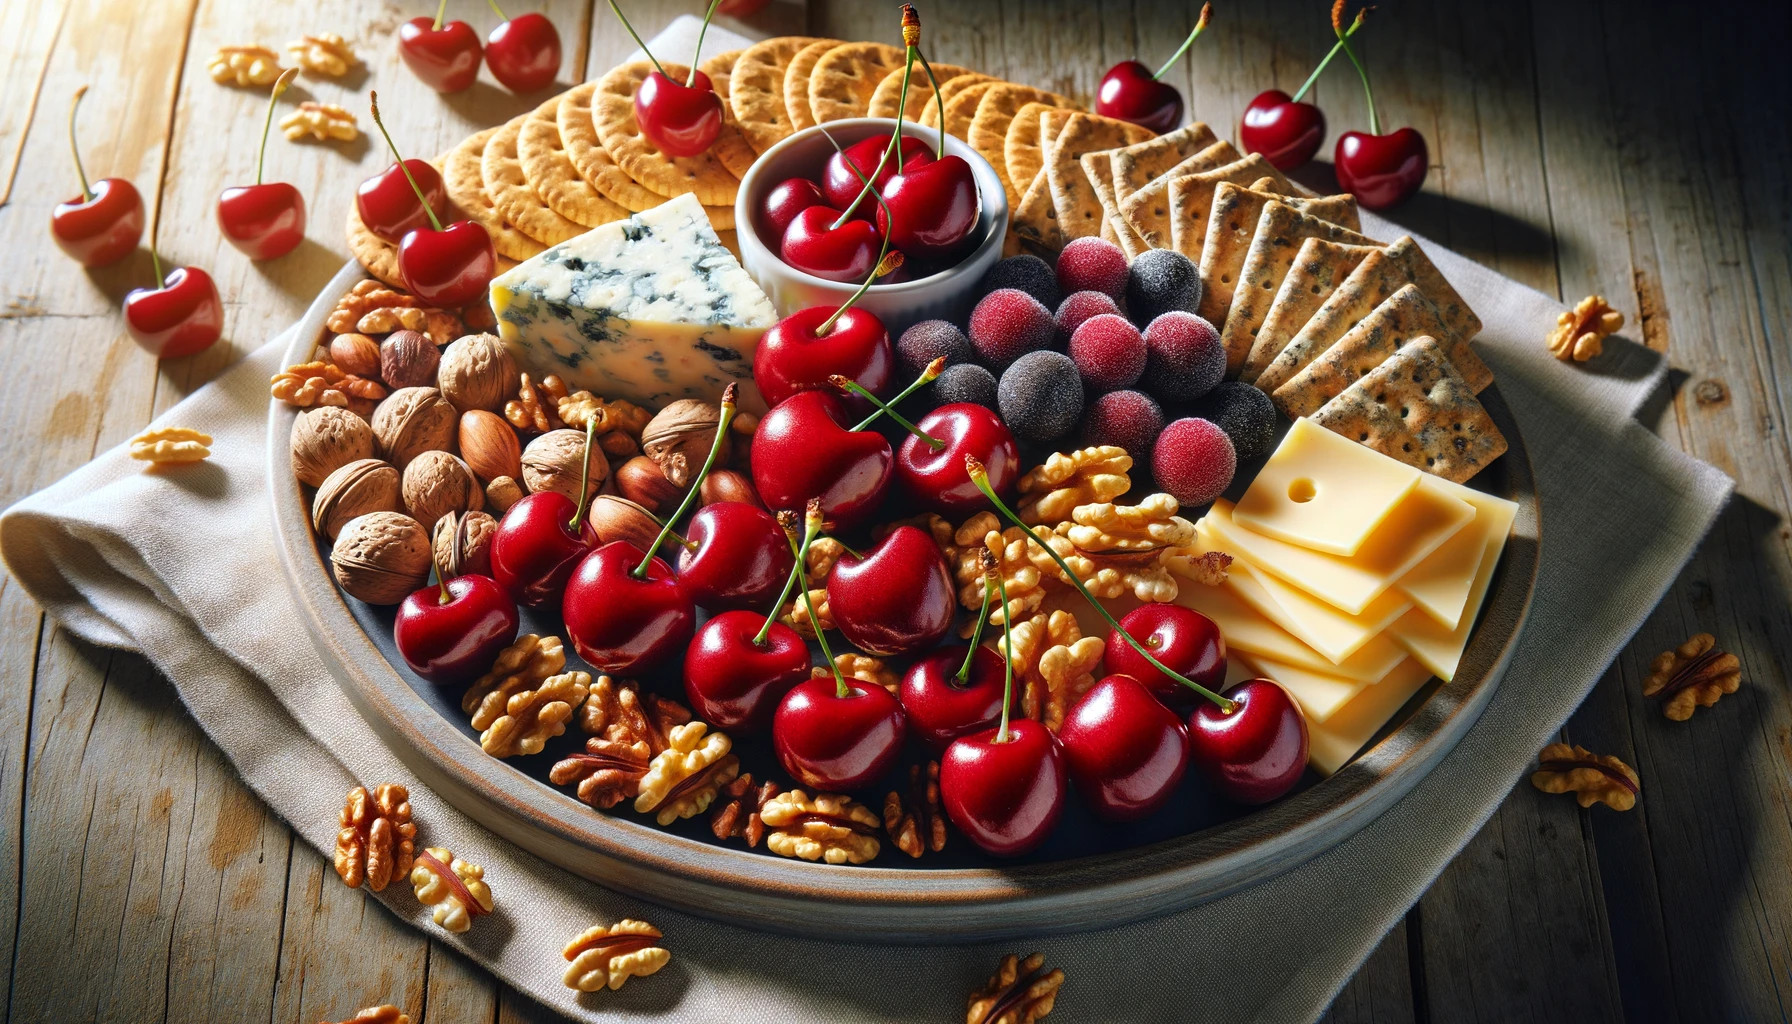 healthy snack platter with cherries, nuts, cheese, and whole-grain crackers